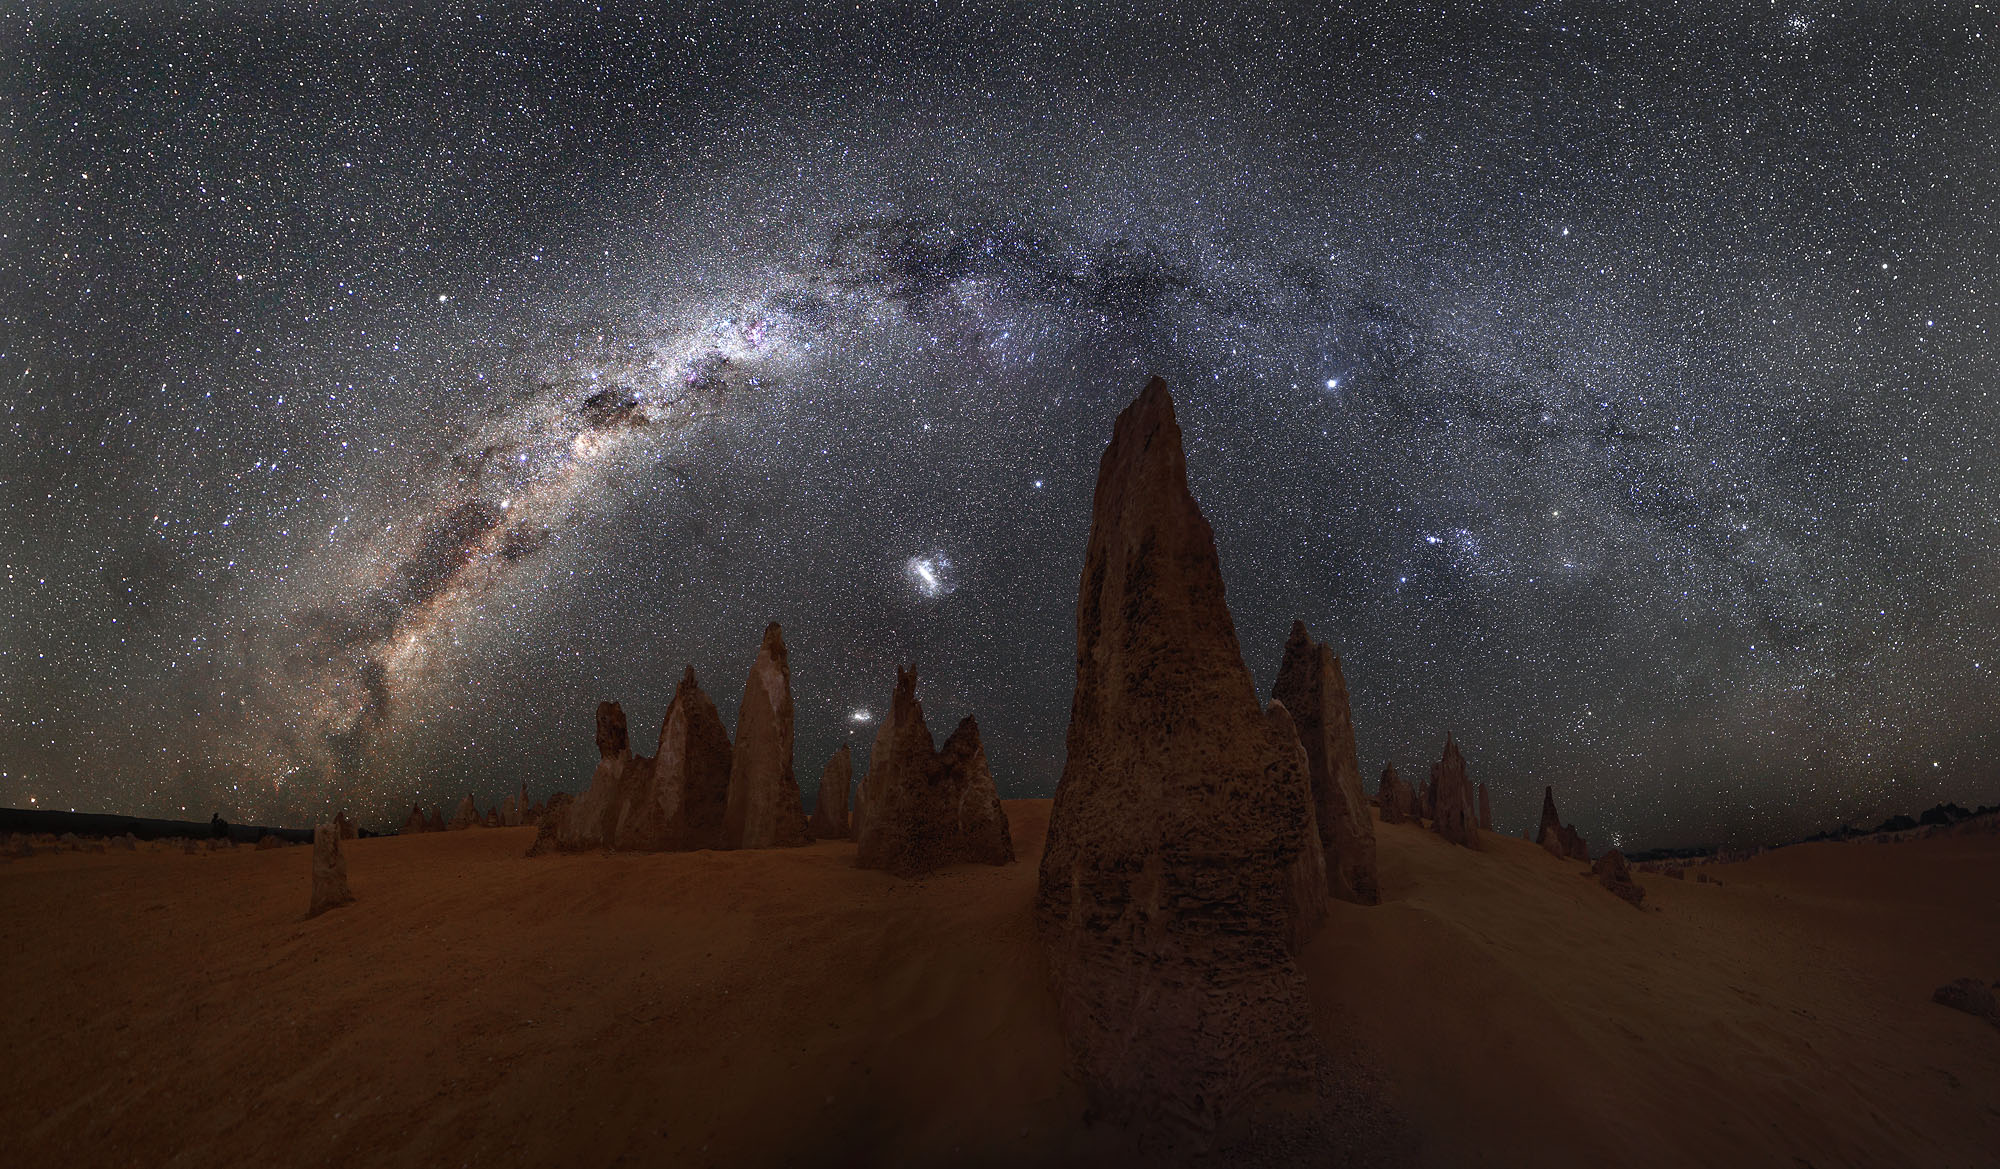 The Pinnacles of Nambung in Western Australia under the arc of the Milky Way are an alien-looking sight.